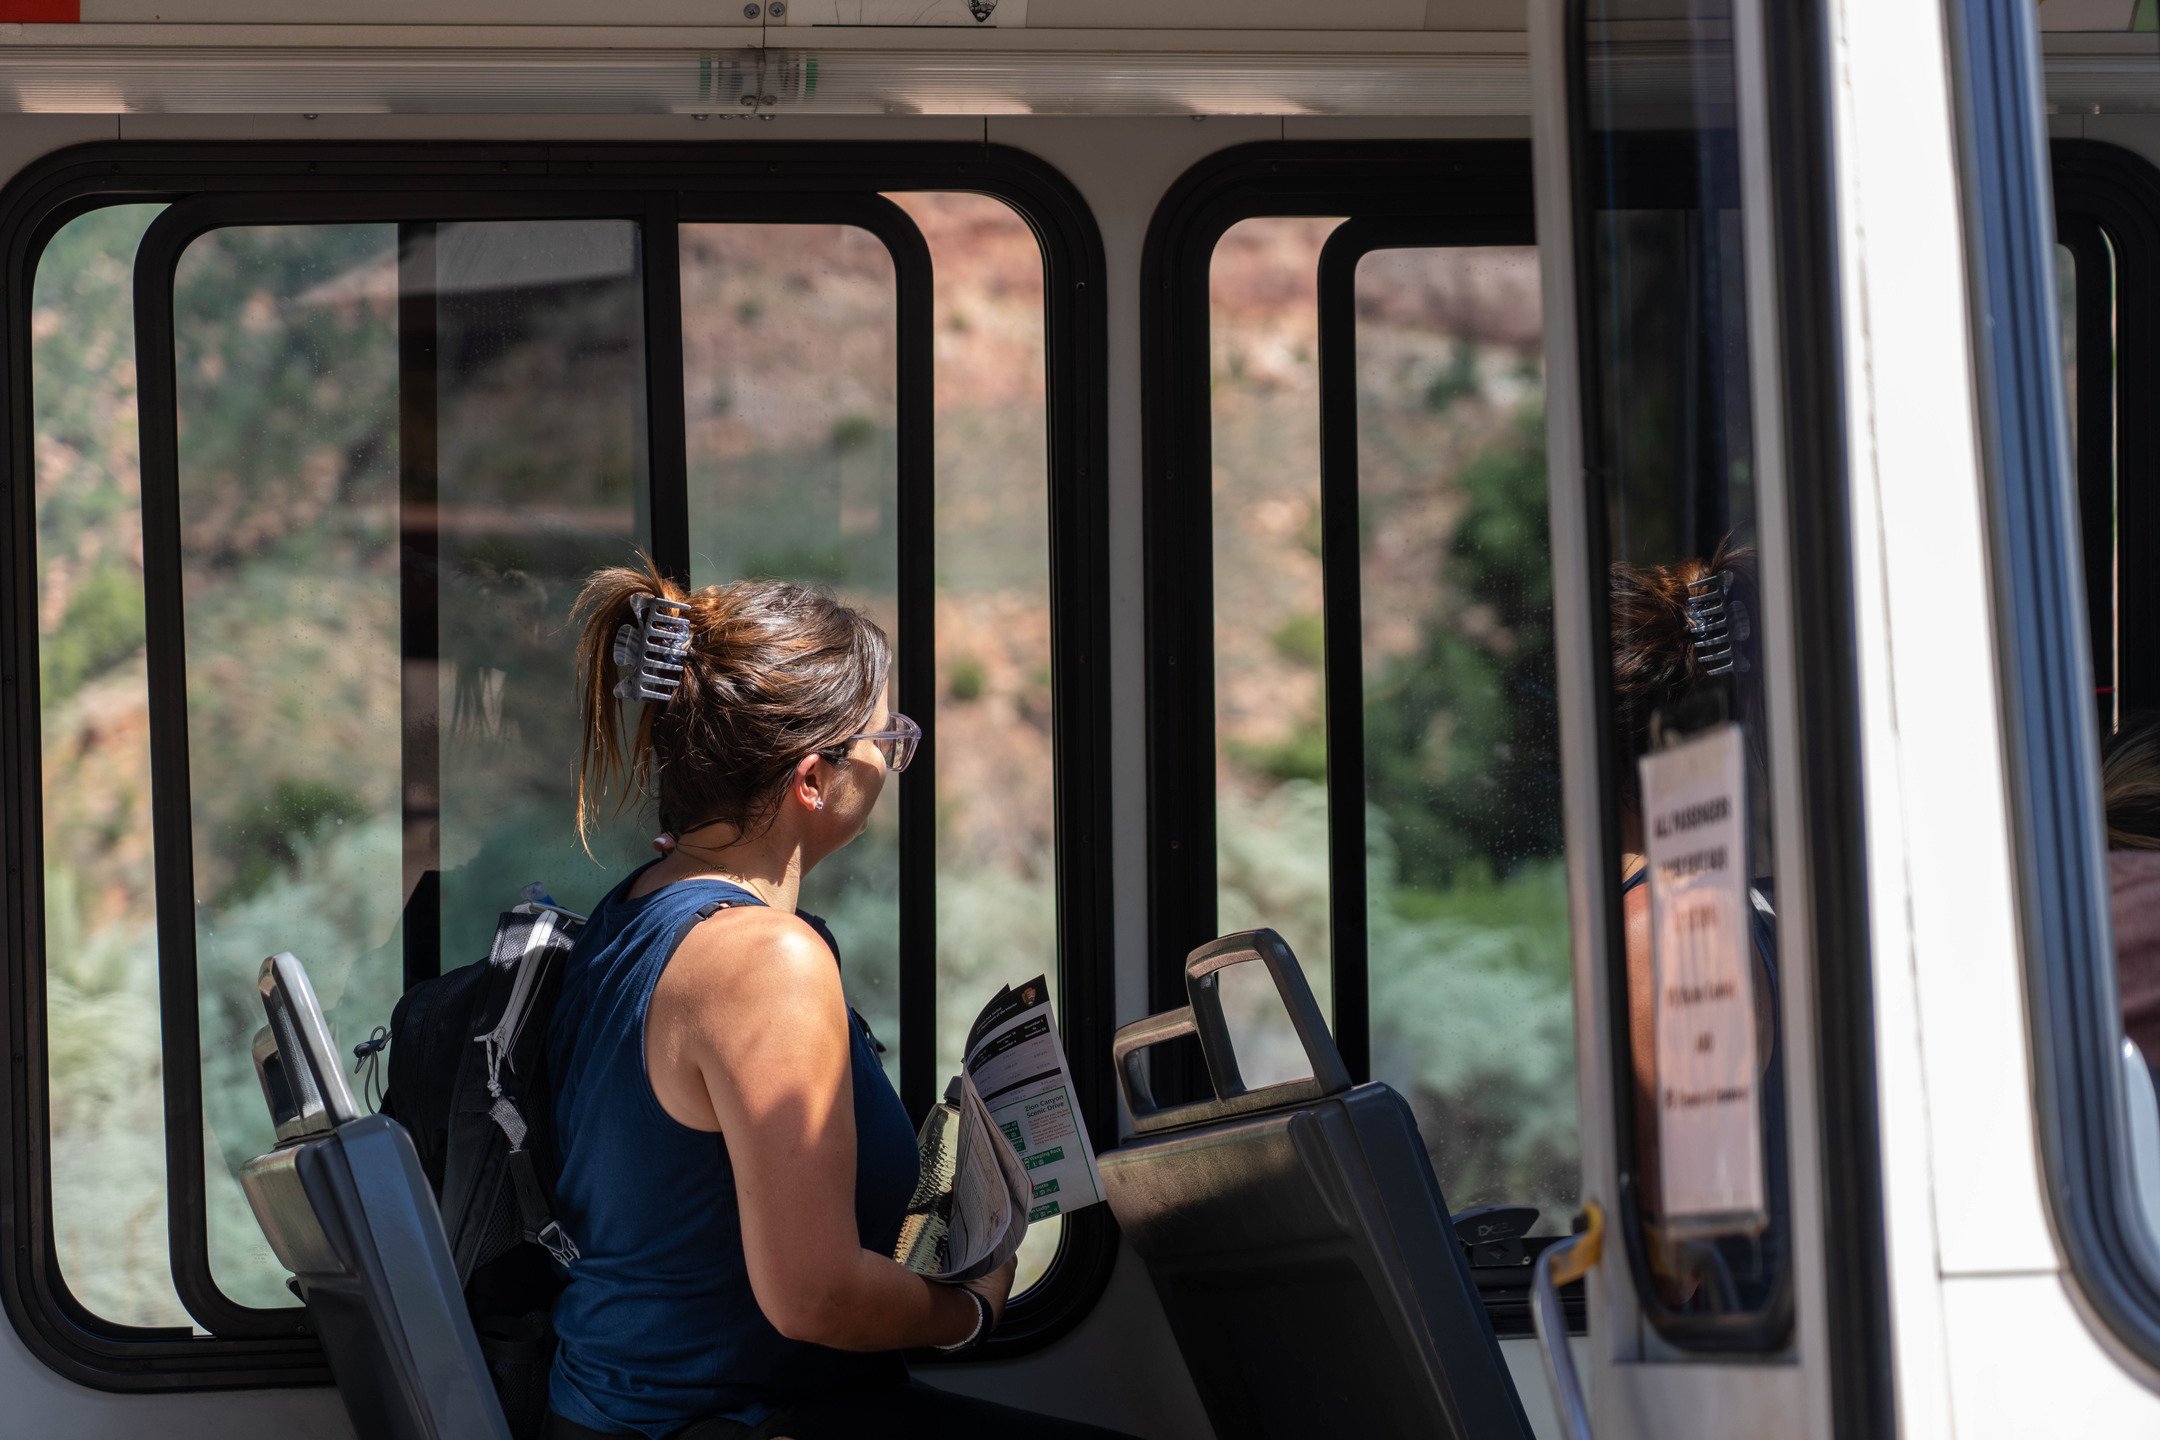 Visitor on a bus at Zion National Park